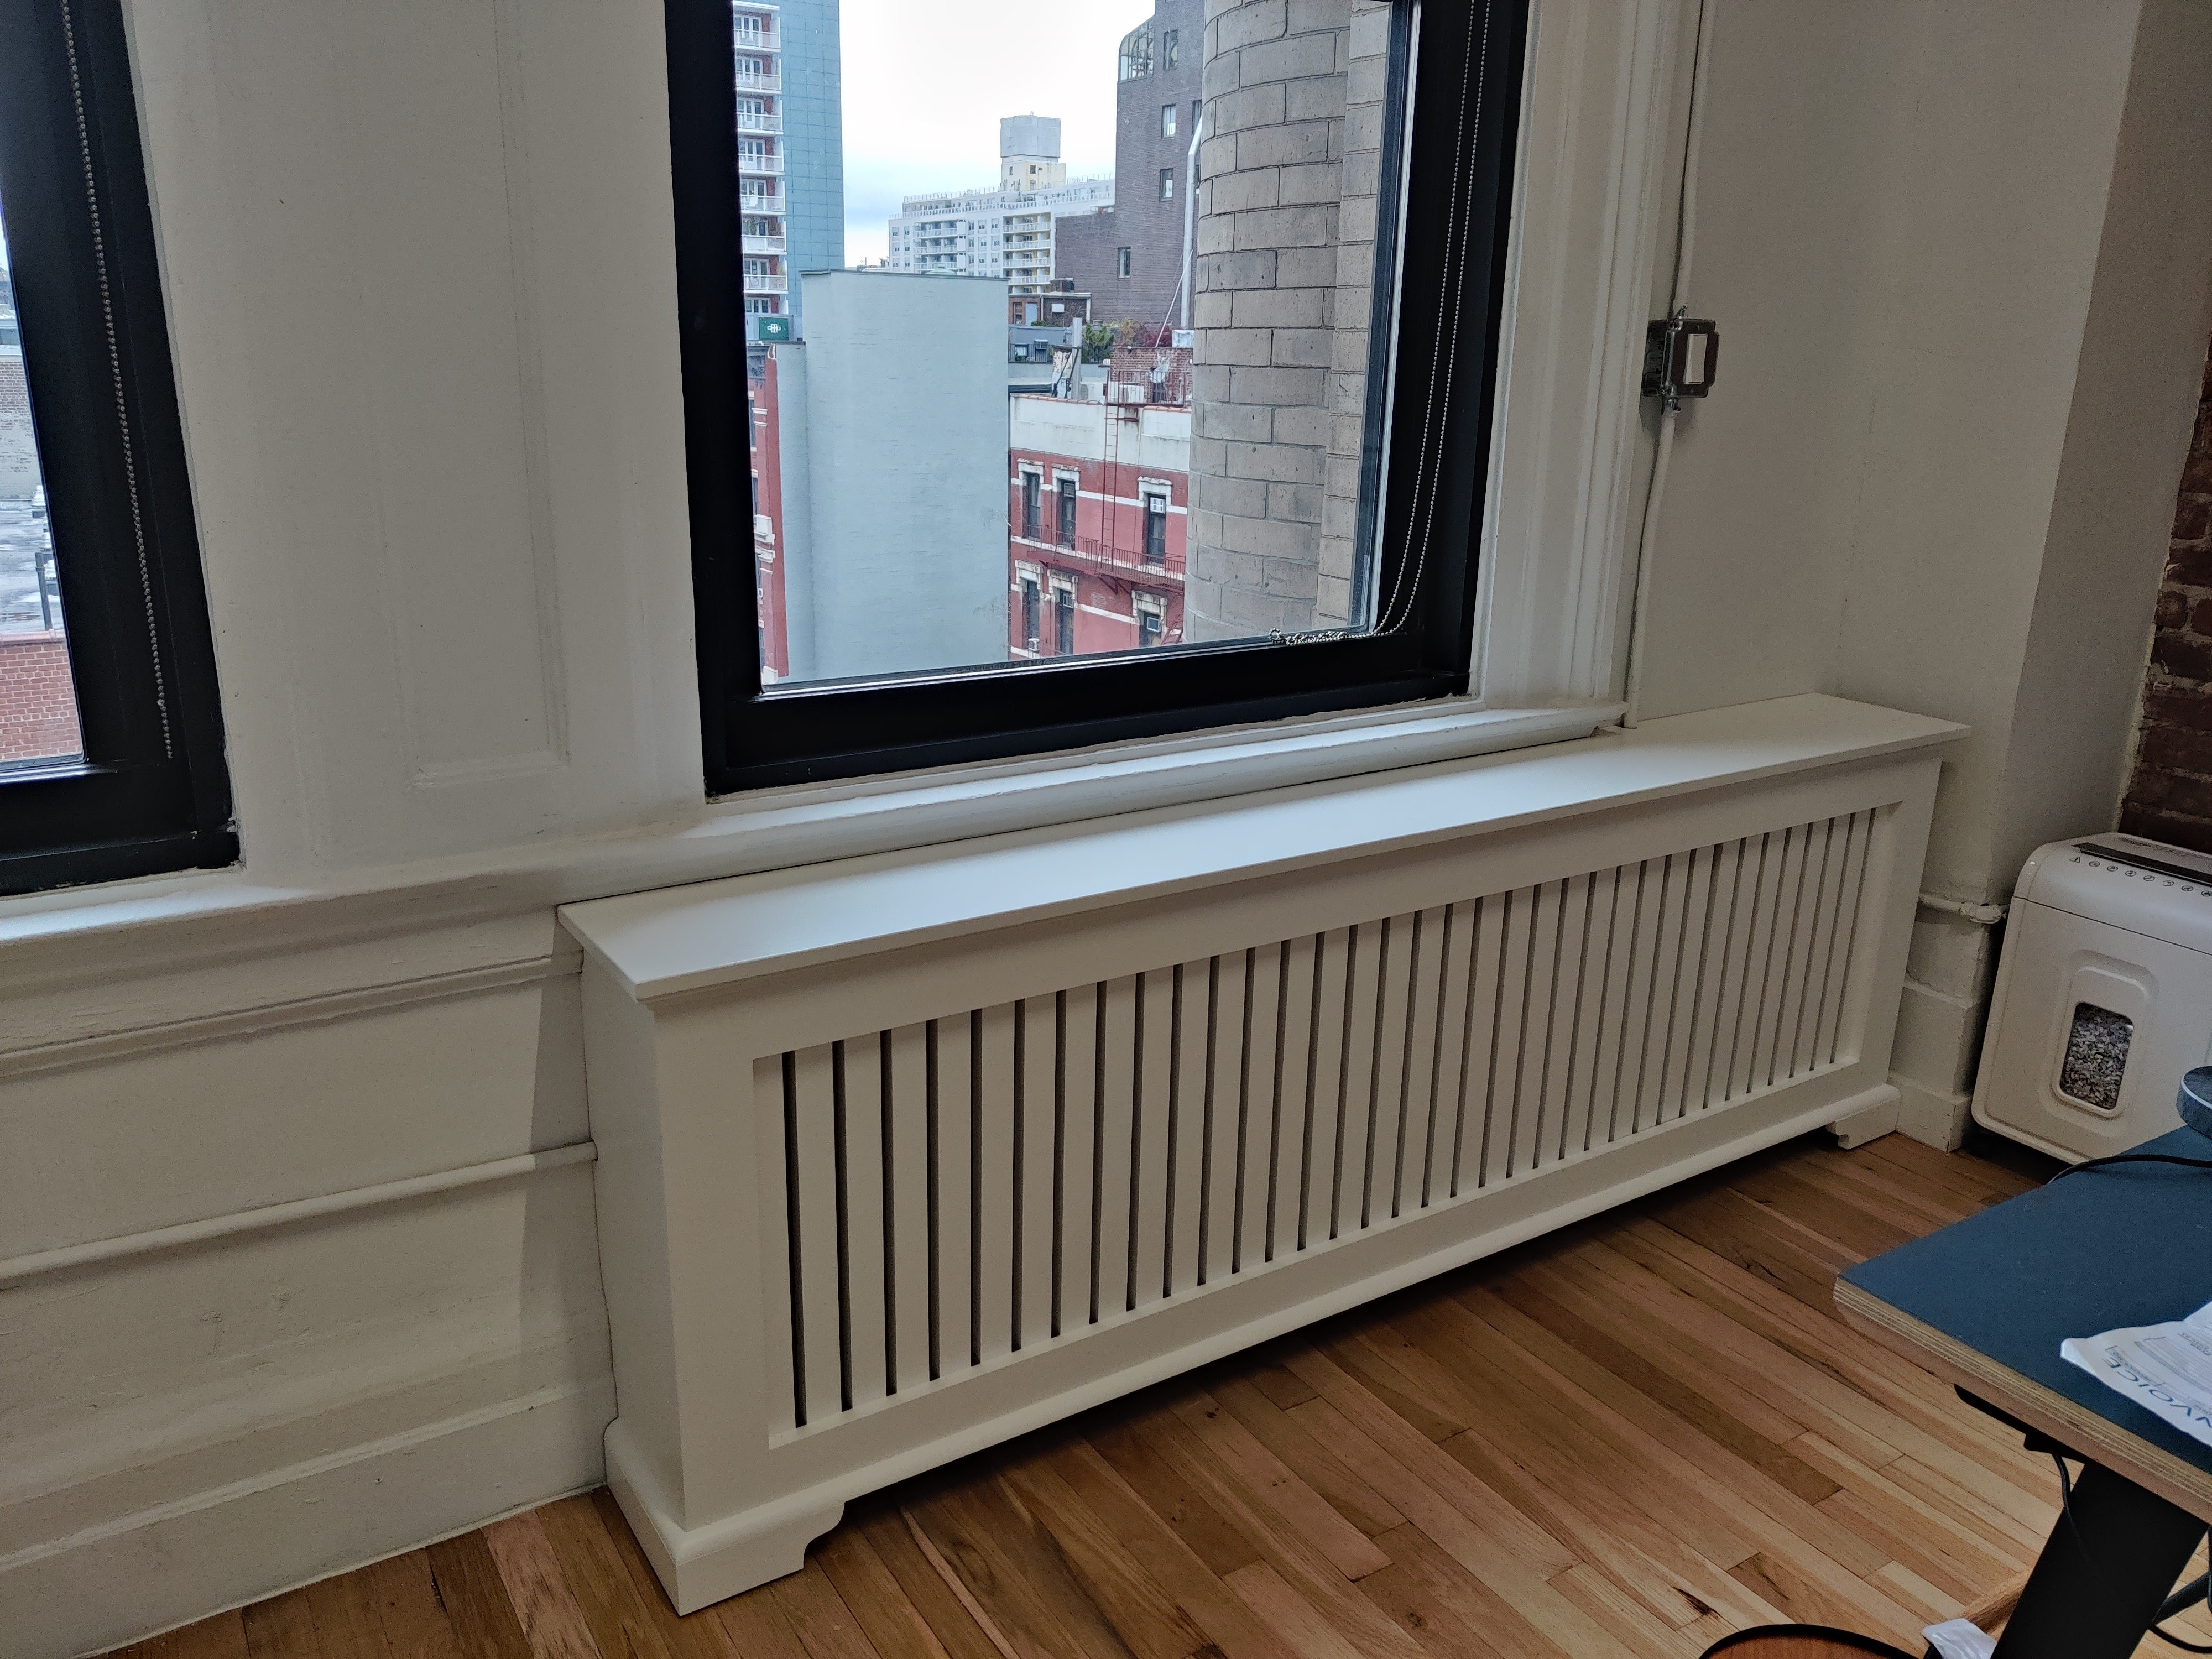 Mission Radiator cover used to cover up pipes and electrical conduits. 